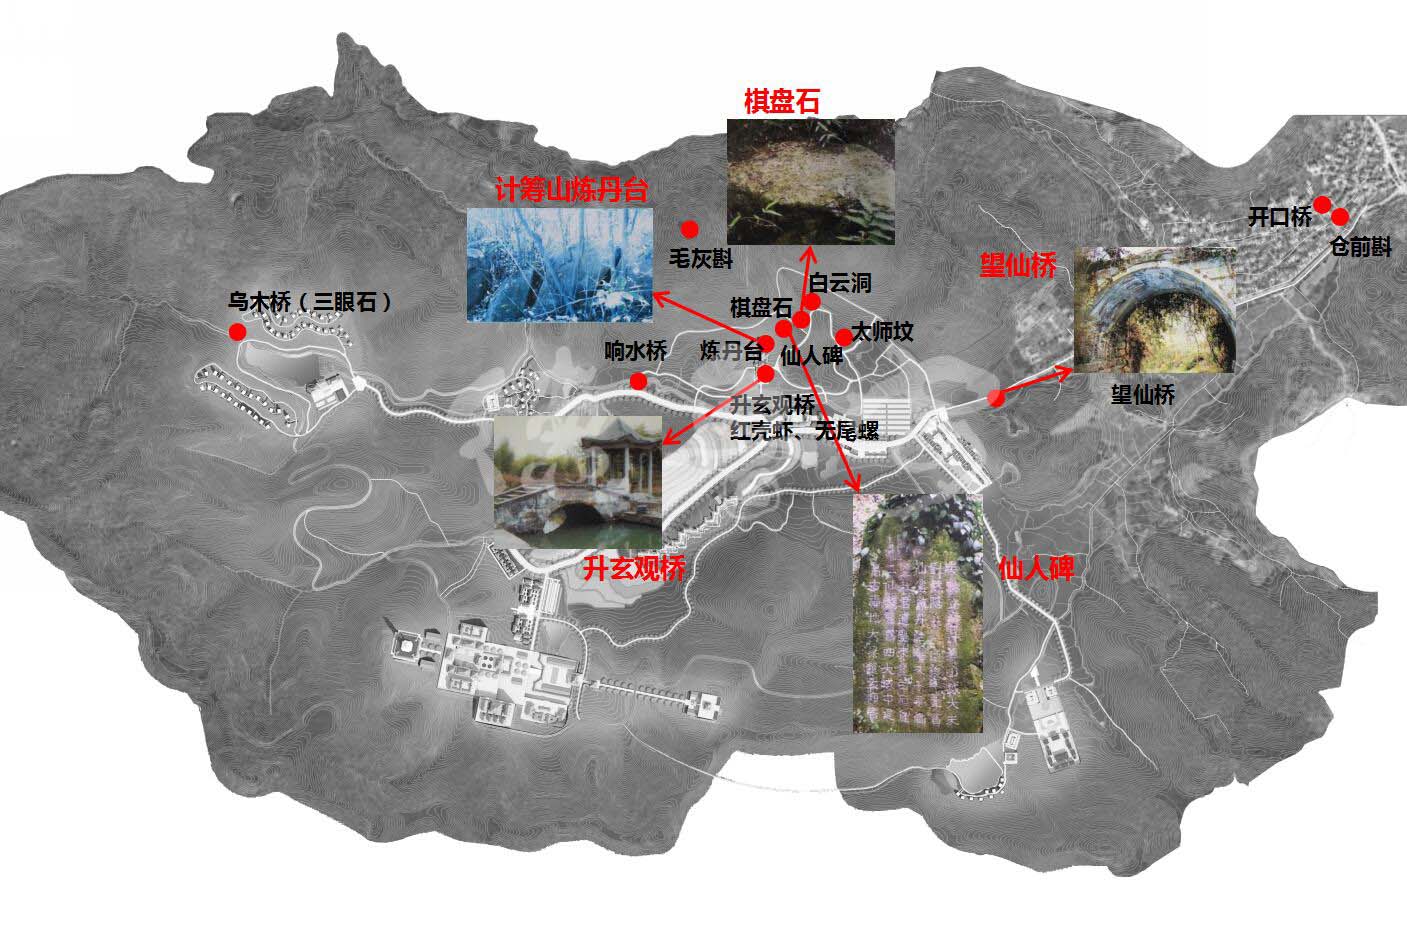 Conceptual master plan of Xili st<x>yle Valley Scenic Area in Zhejiang Province(图12)